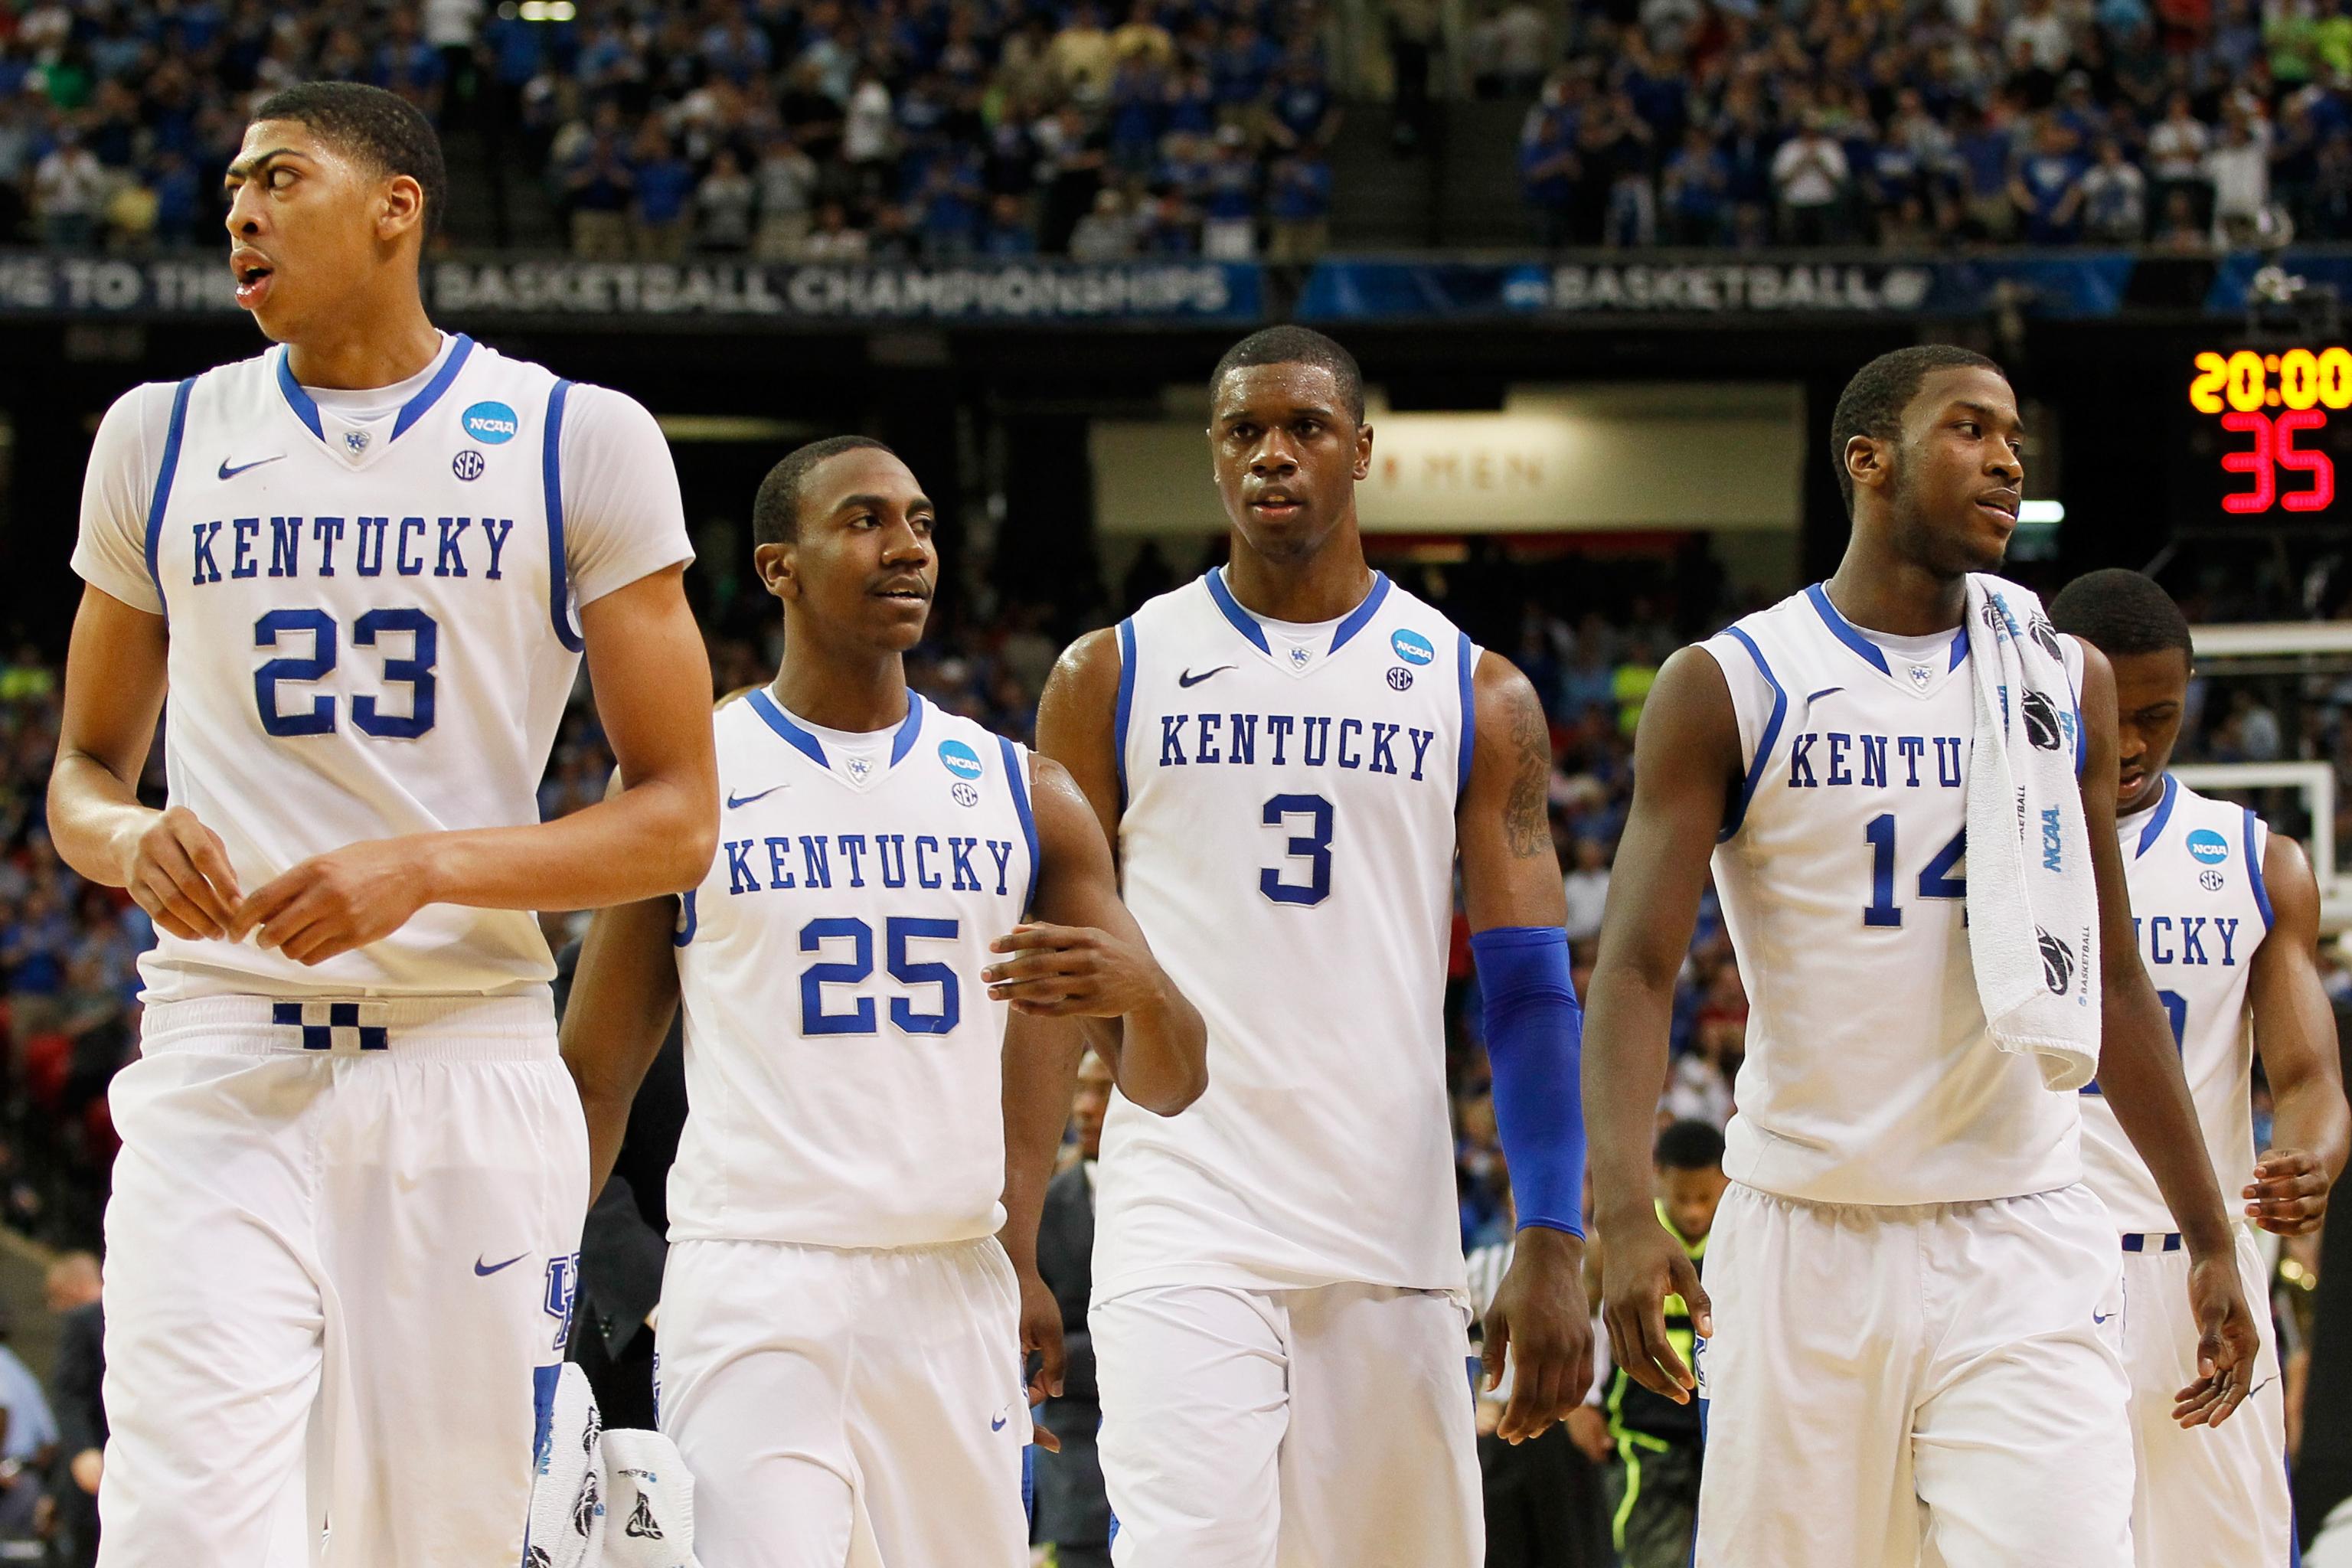 2012 University of Kentucky basketball team: Where are they now?